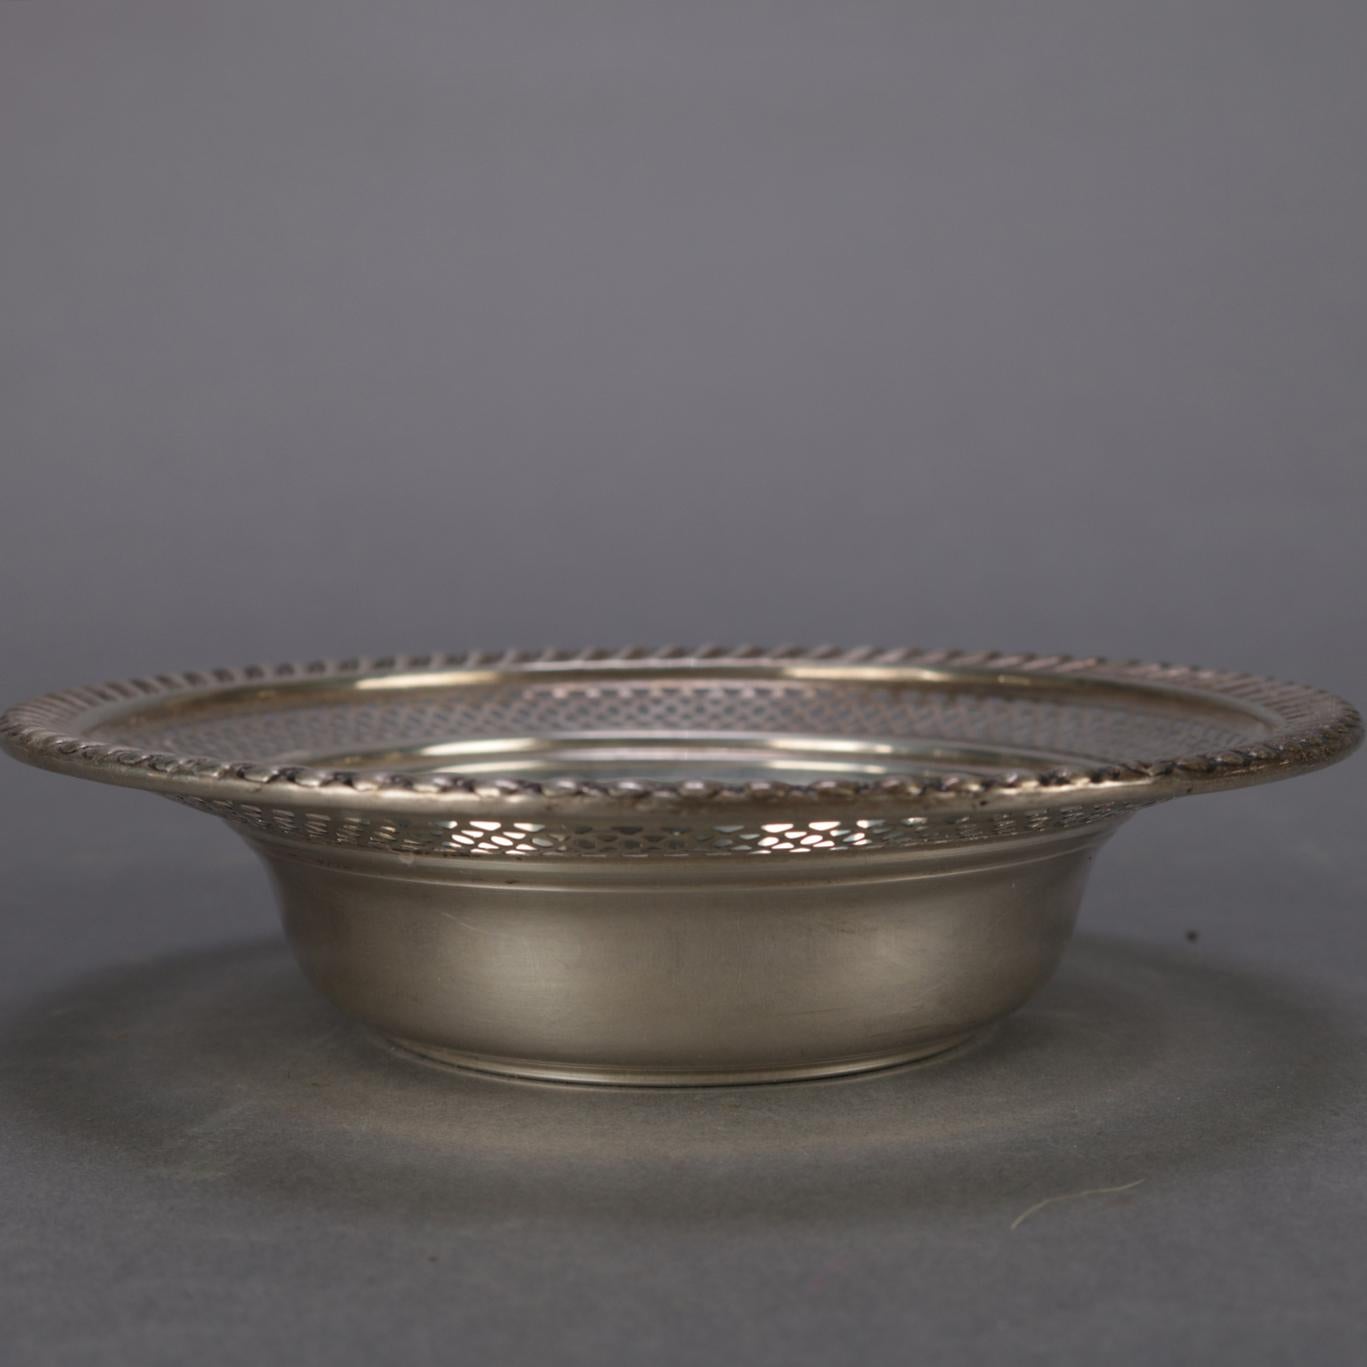 Sterling silver bowl features flared form with reticulated rim having rope twist border, marked Sterling on base, 1.35 toz, 20th century


Measures: 1.25